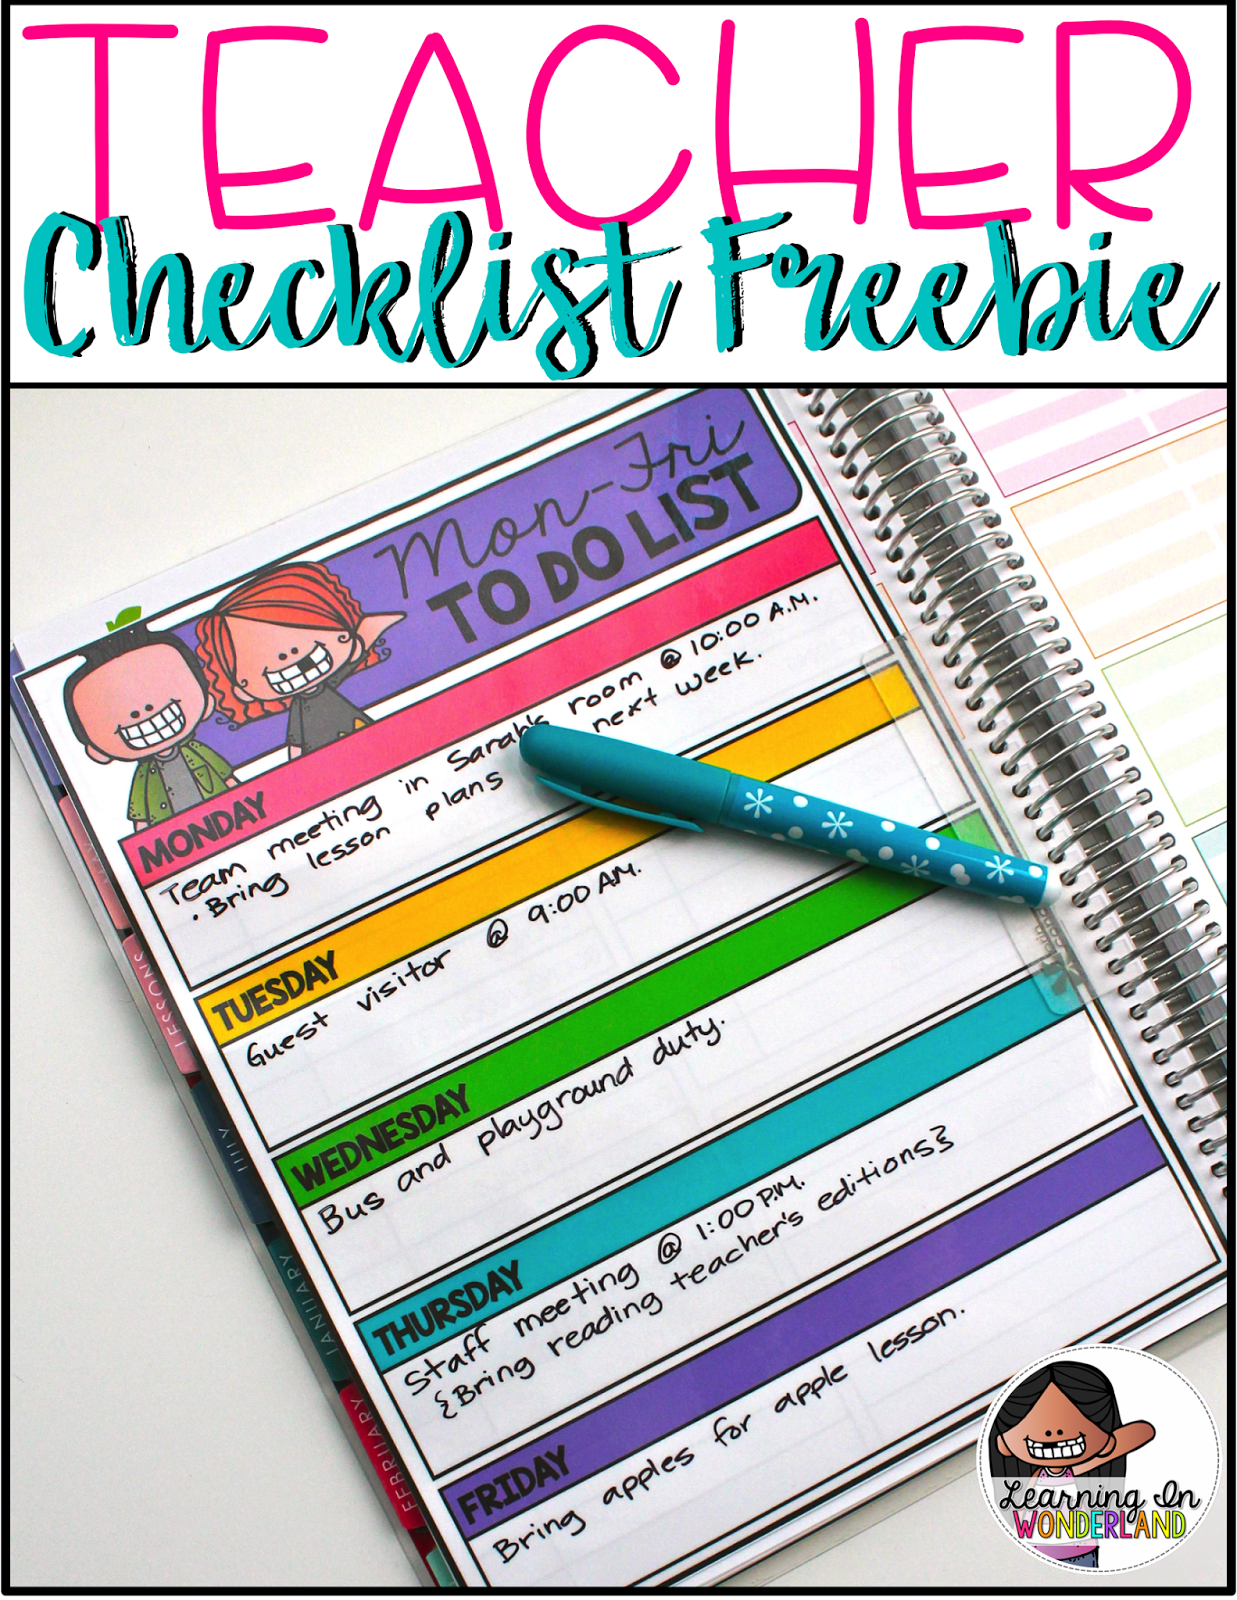 Get this cute checklist for FREE! Laminate it and put it into your planner to use every week!